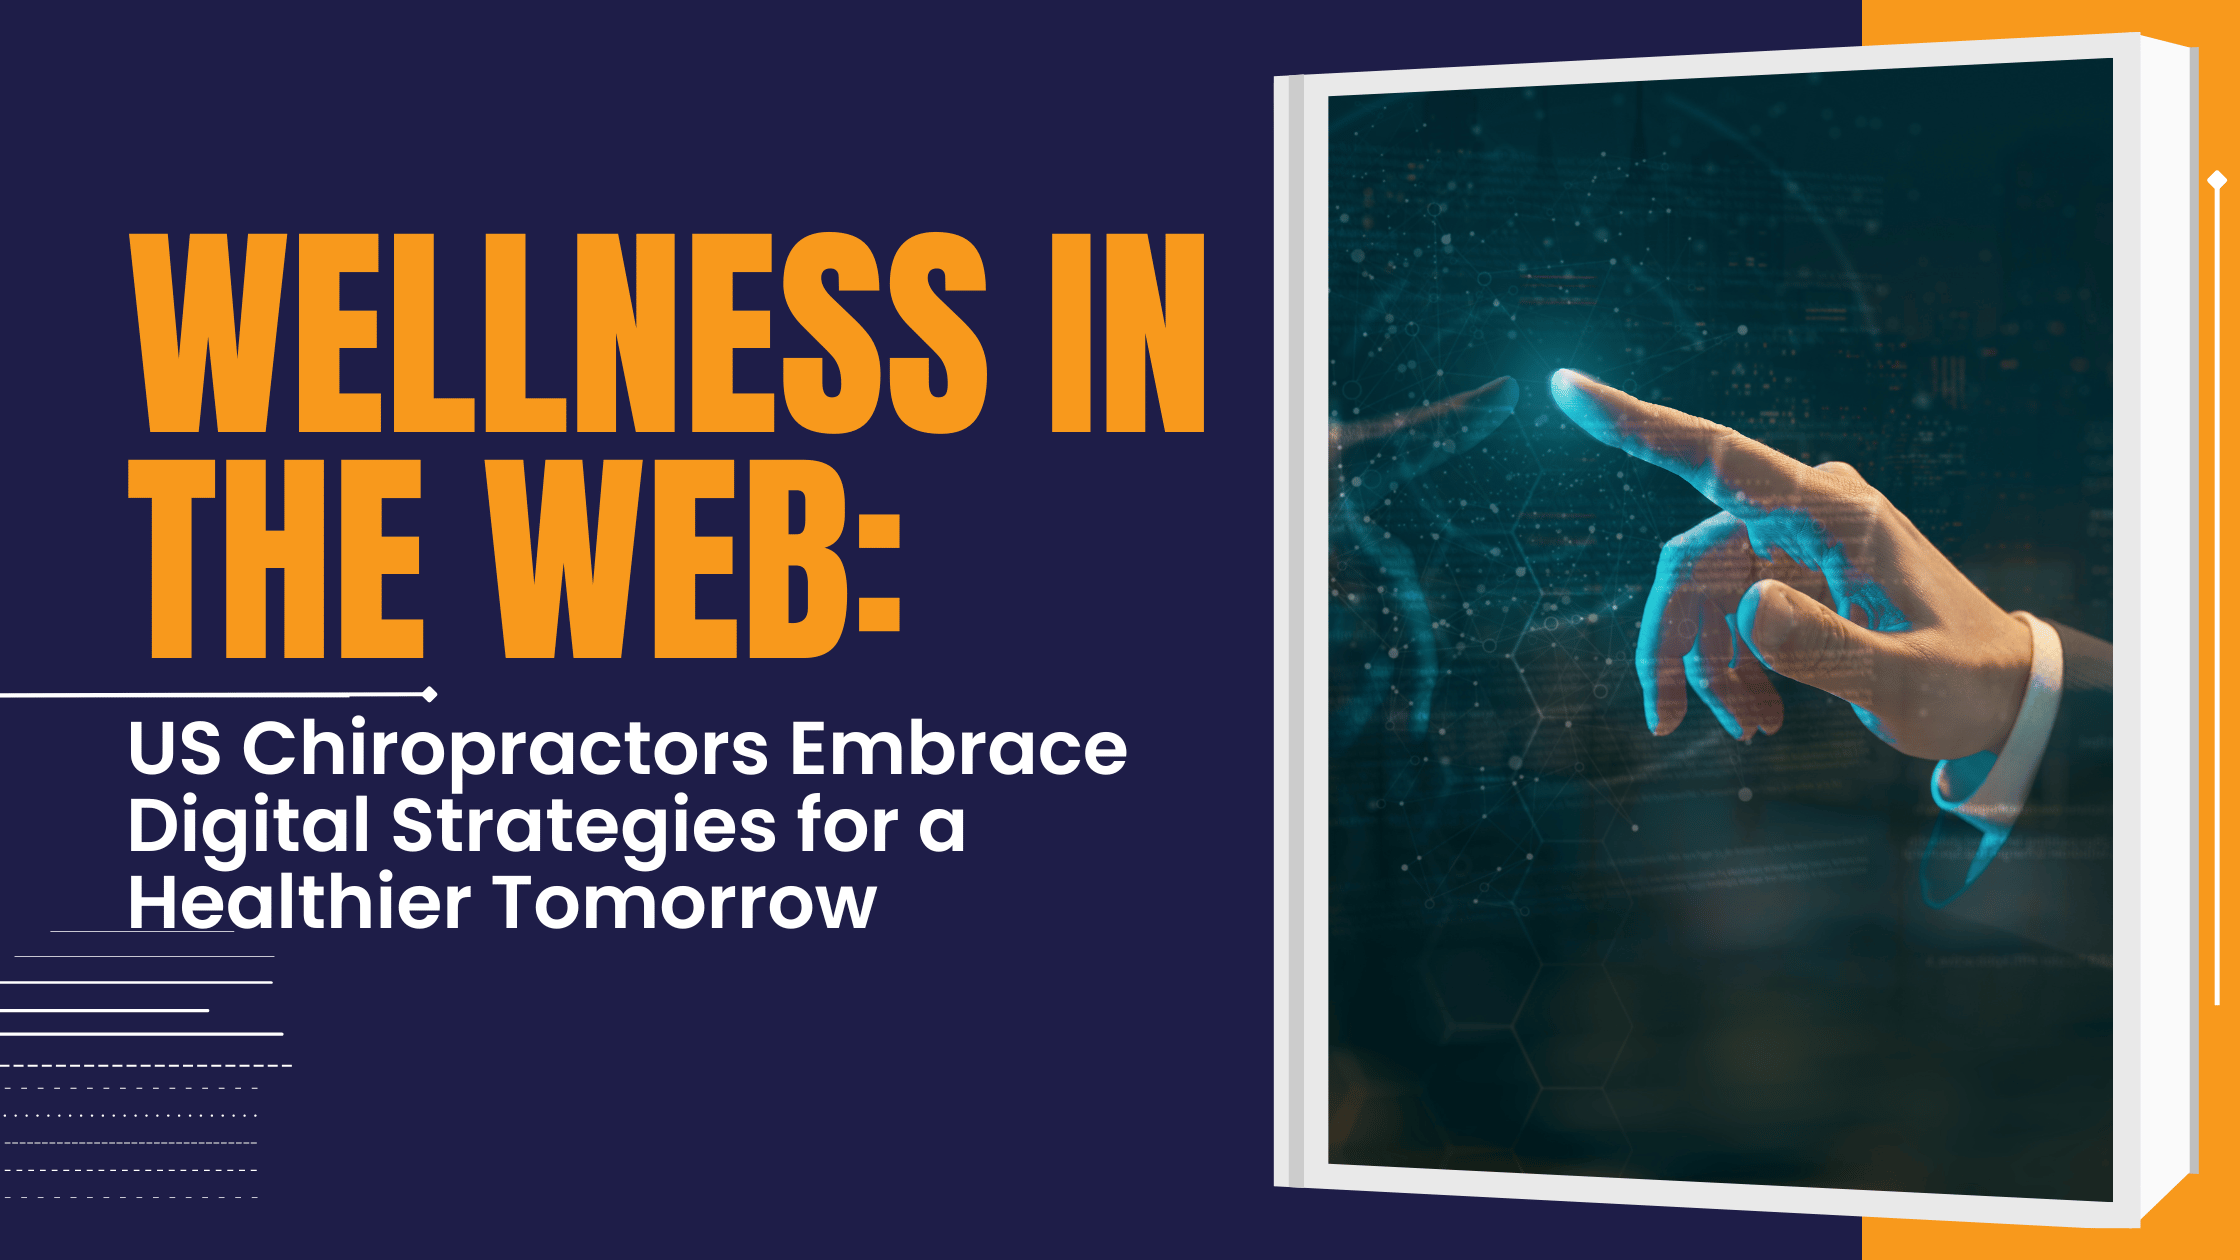 Wellness in the Web: US Chiropractors Embrace Digital Strategies for a Healthier Tomorrow